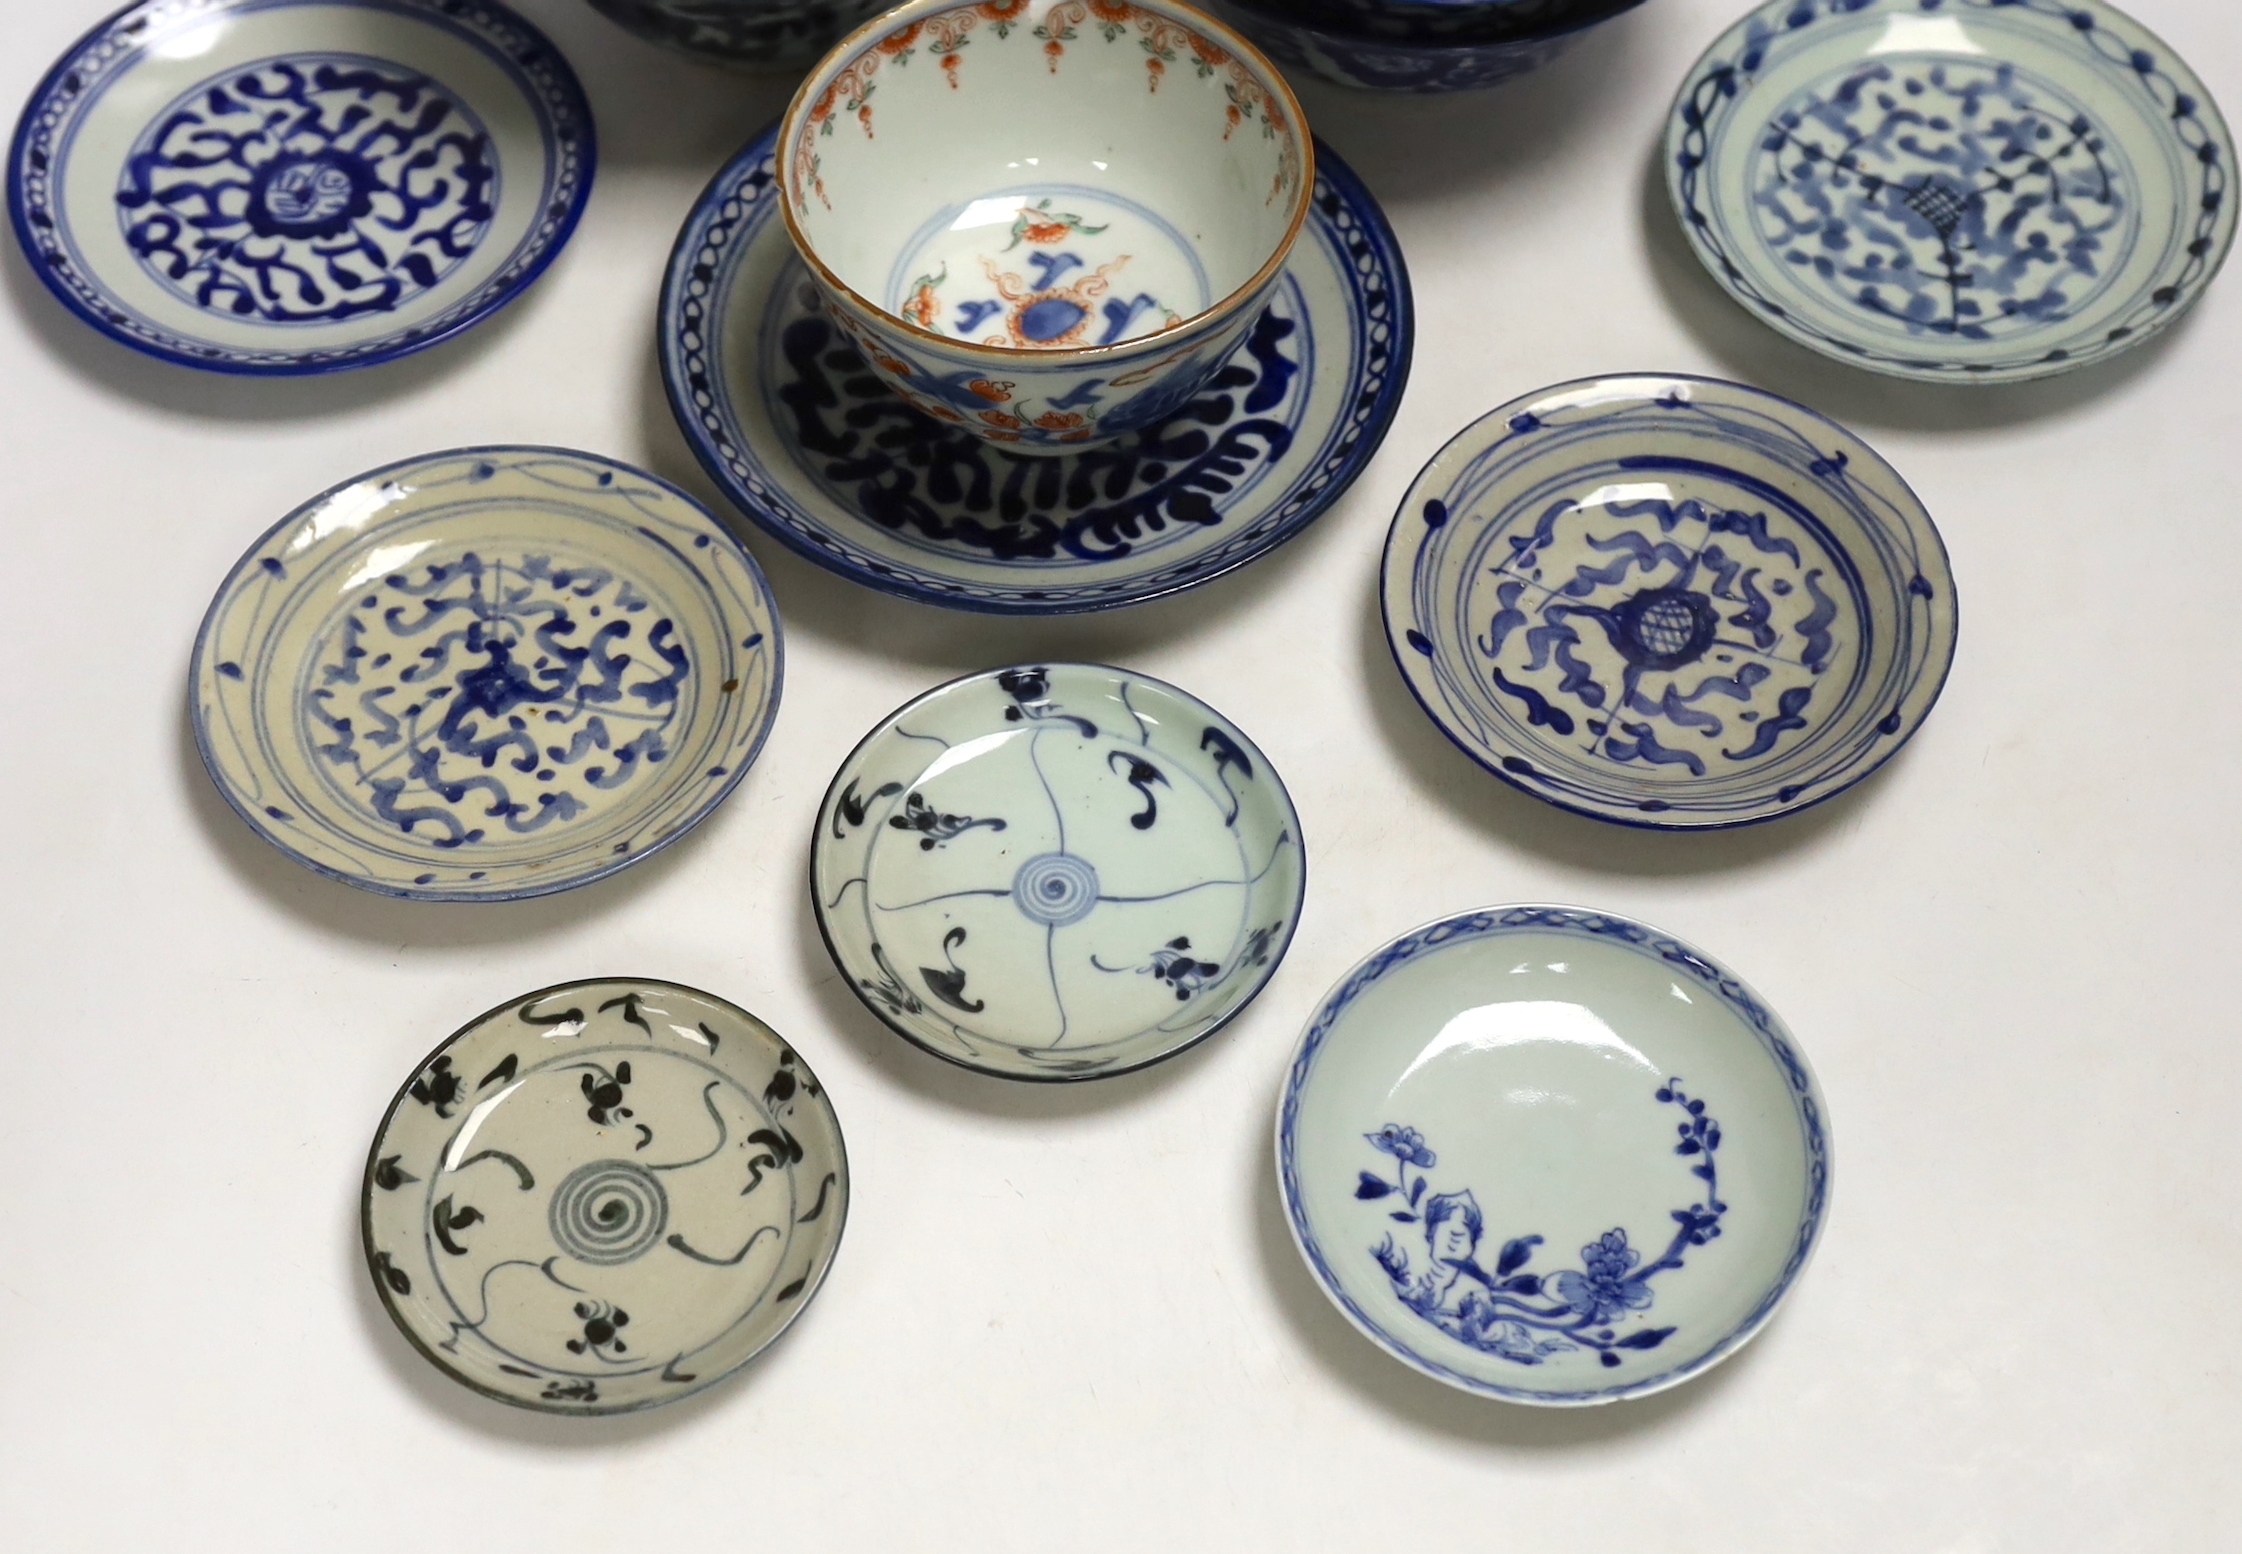 Thirteen Chinese blue and white dishes, plates and bowls, largest diameter 17.5cm